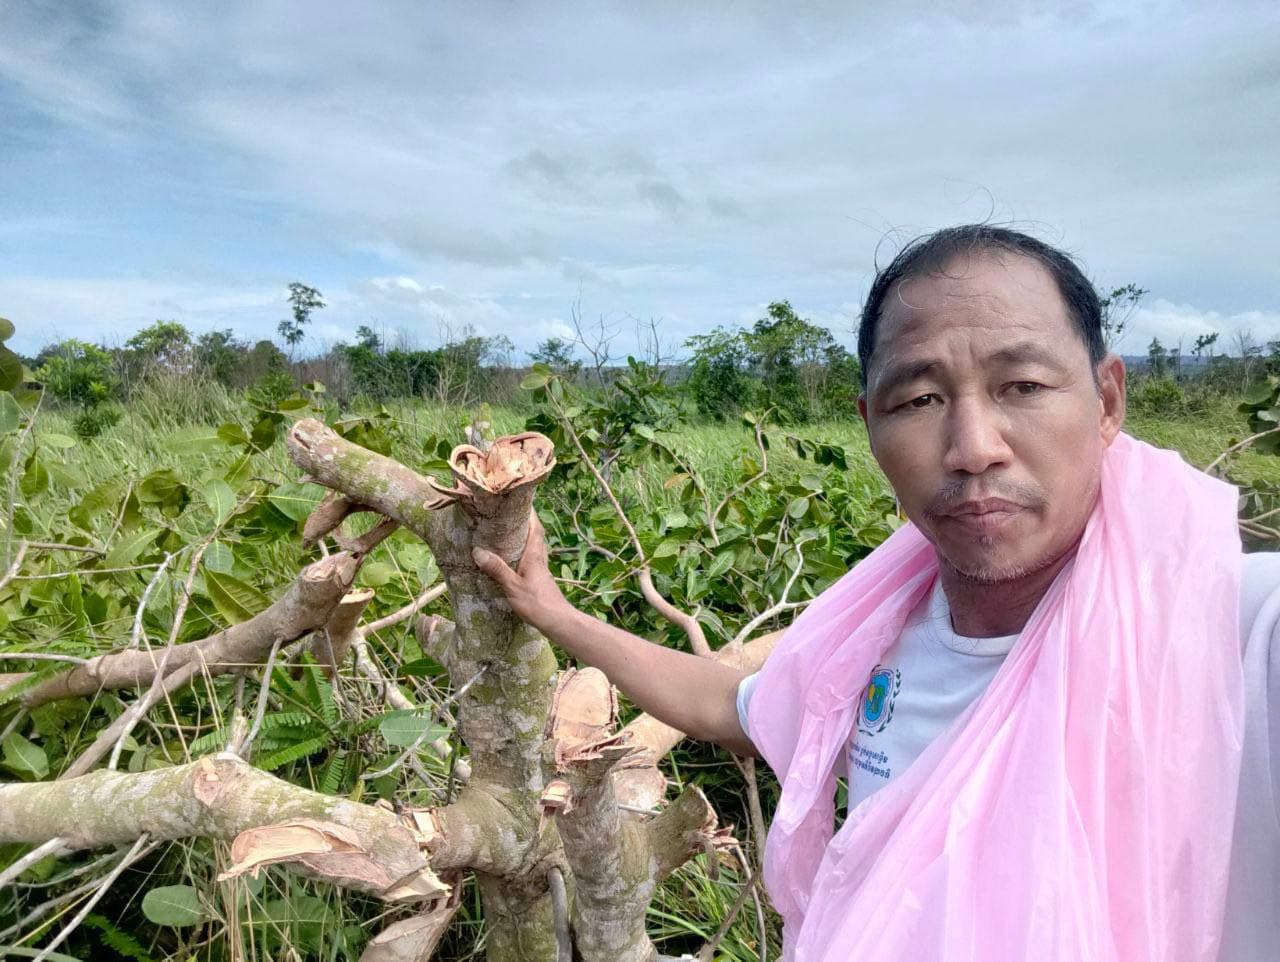 Digital news publisher Yuon Chhiv with the remains of his cashew orchard, which was razed by authorities in early September.